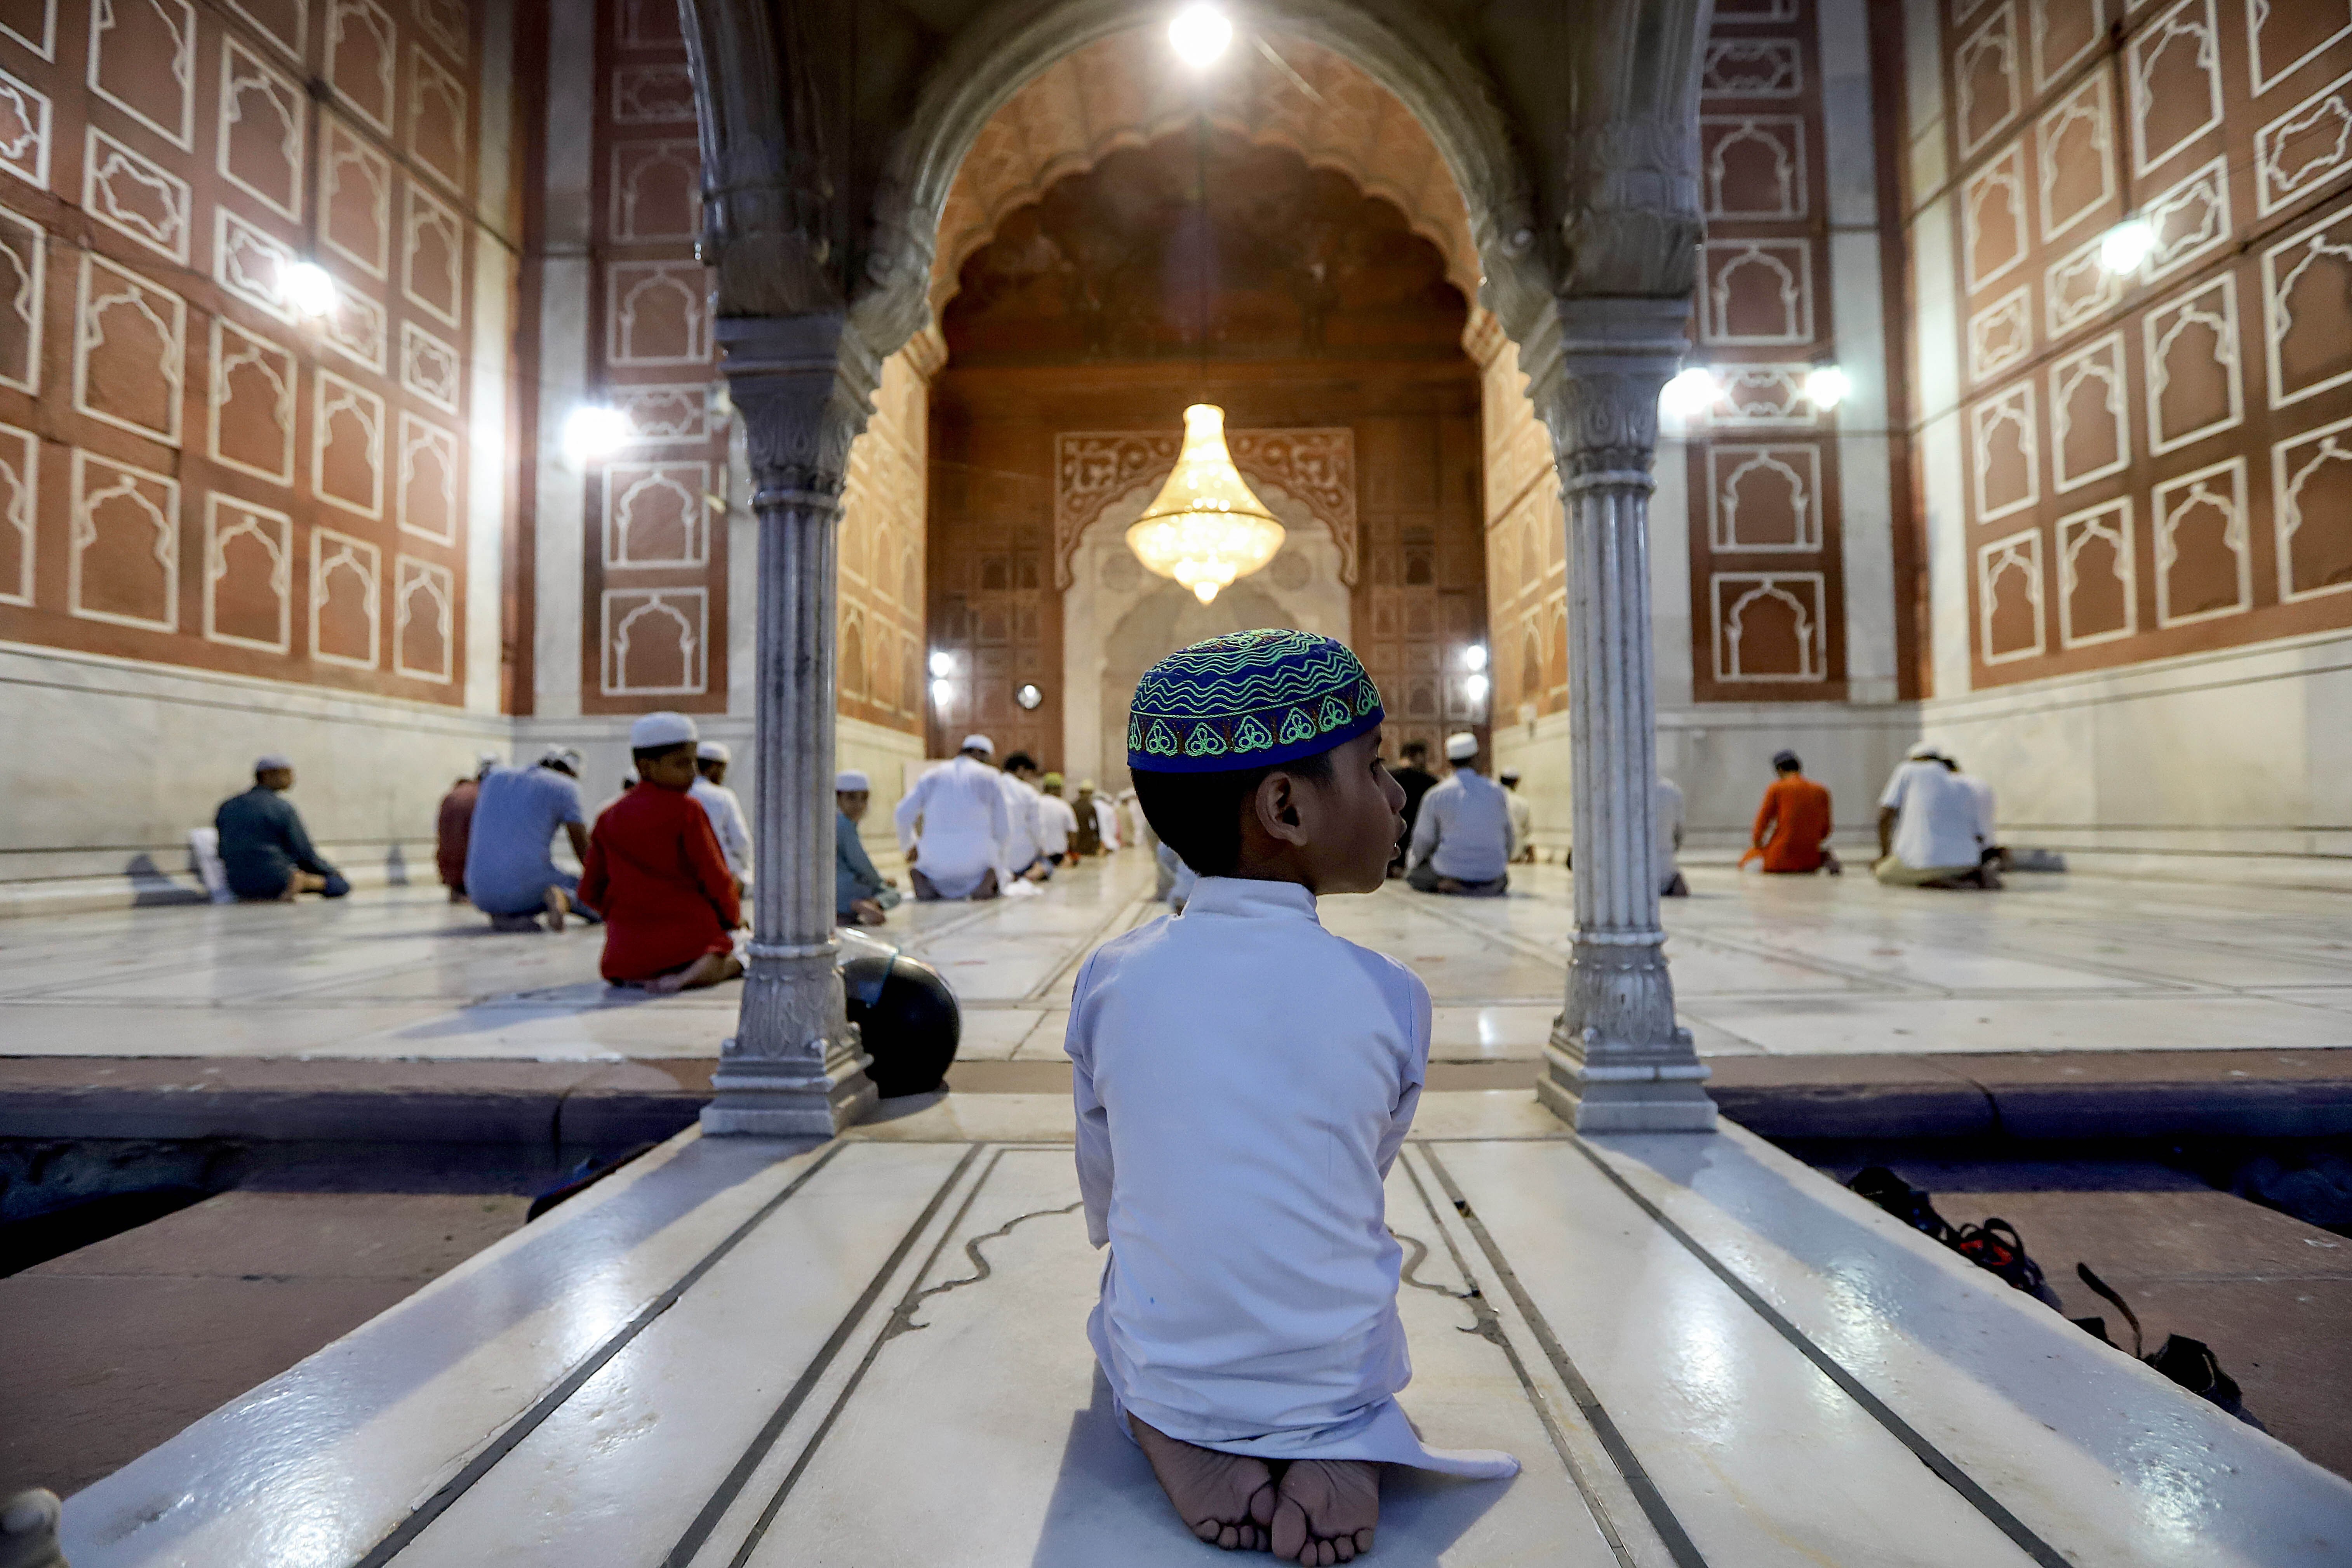 Devotees pray during the religious festival of Eid ul-Fitr in Jama Masjid, Delhi, India. Many ceremonies have been cancelled across the country due to the coronavirus pandemic. Photo: Amarjeet Kumar Singh